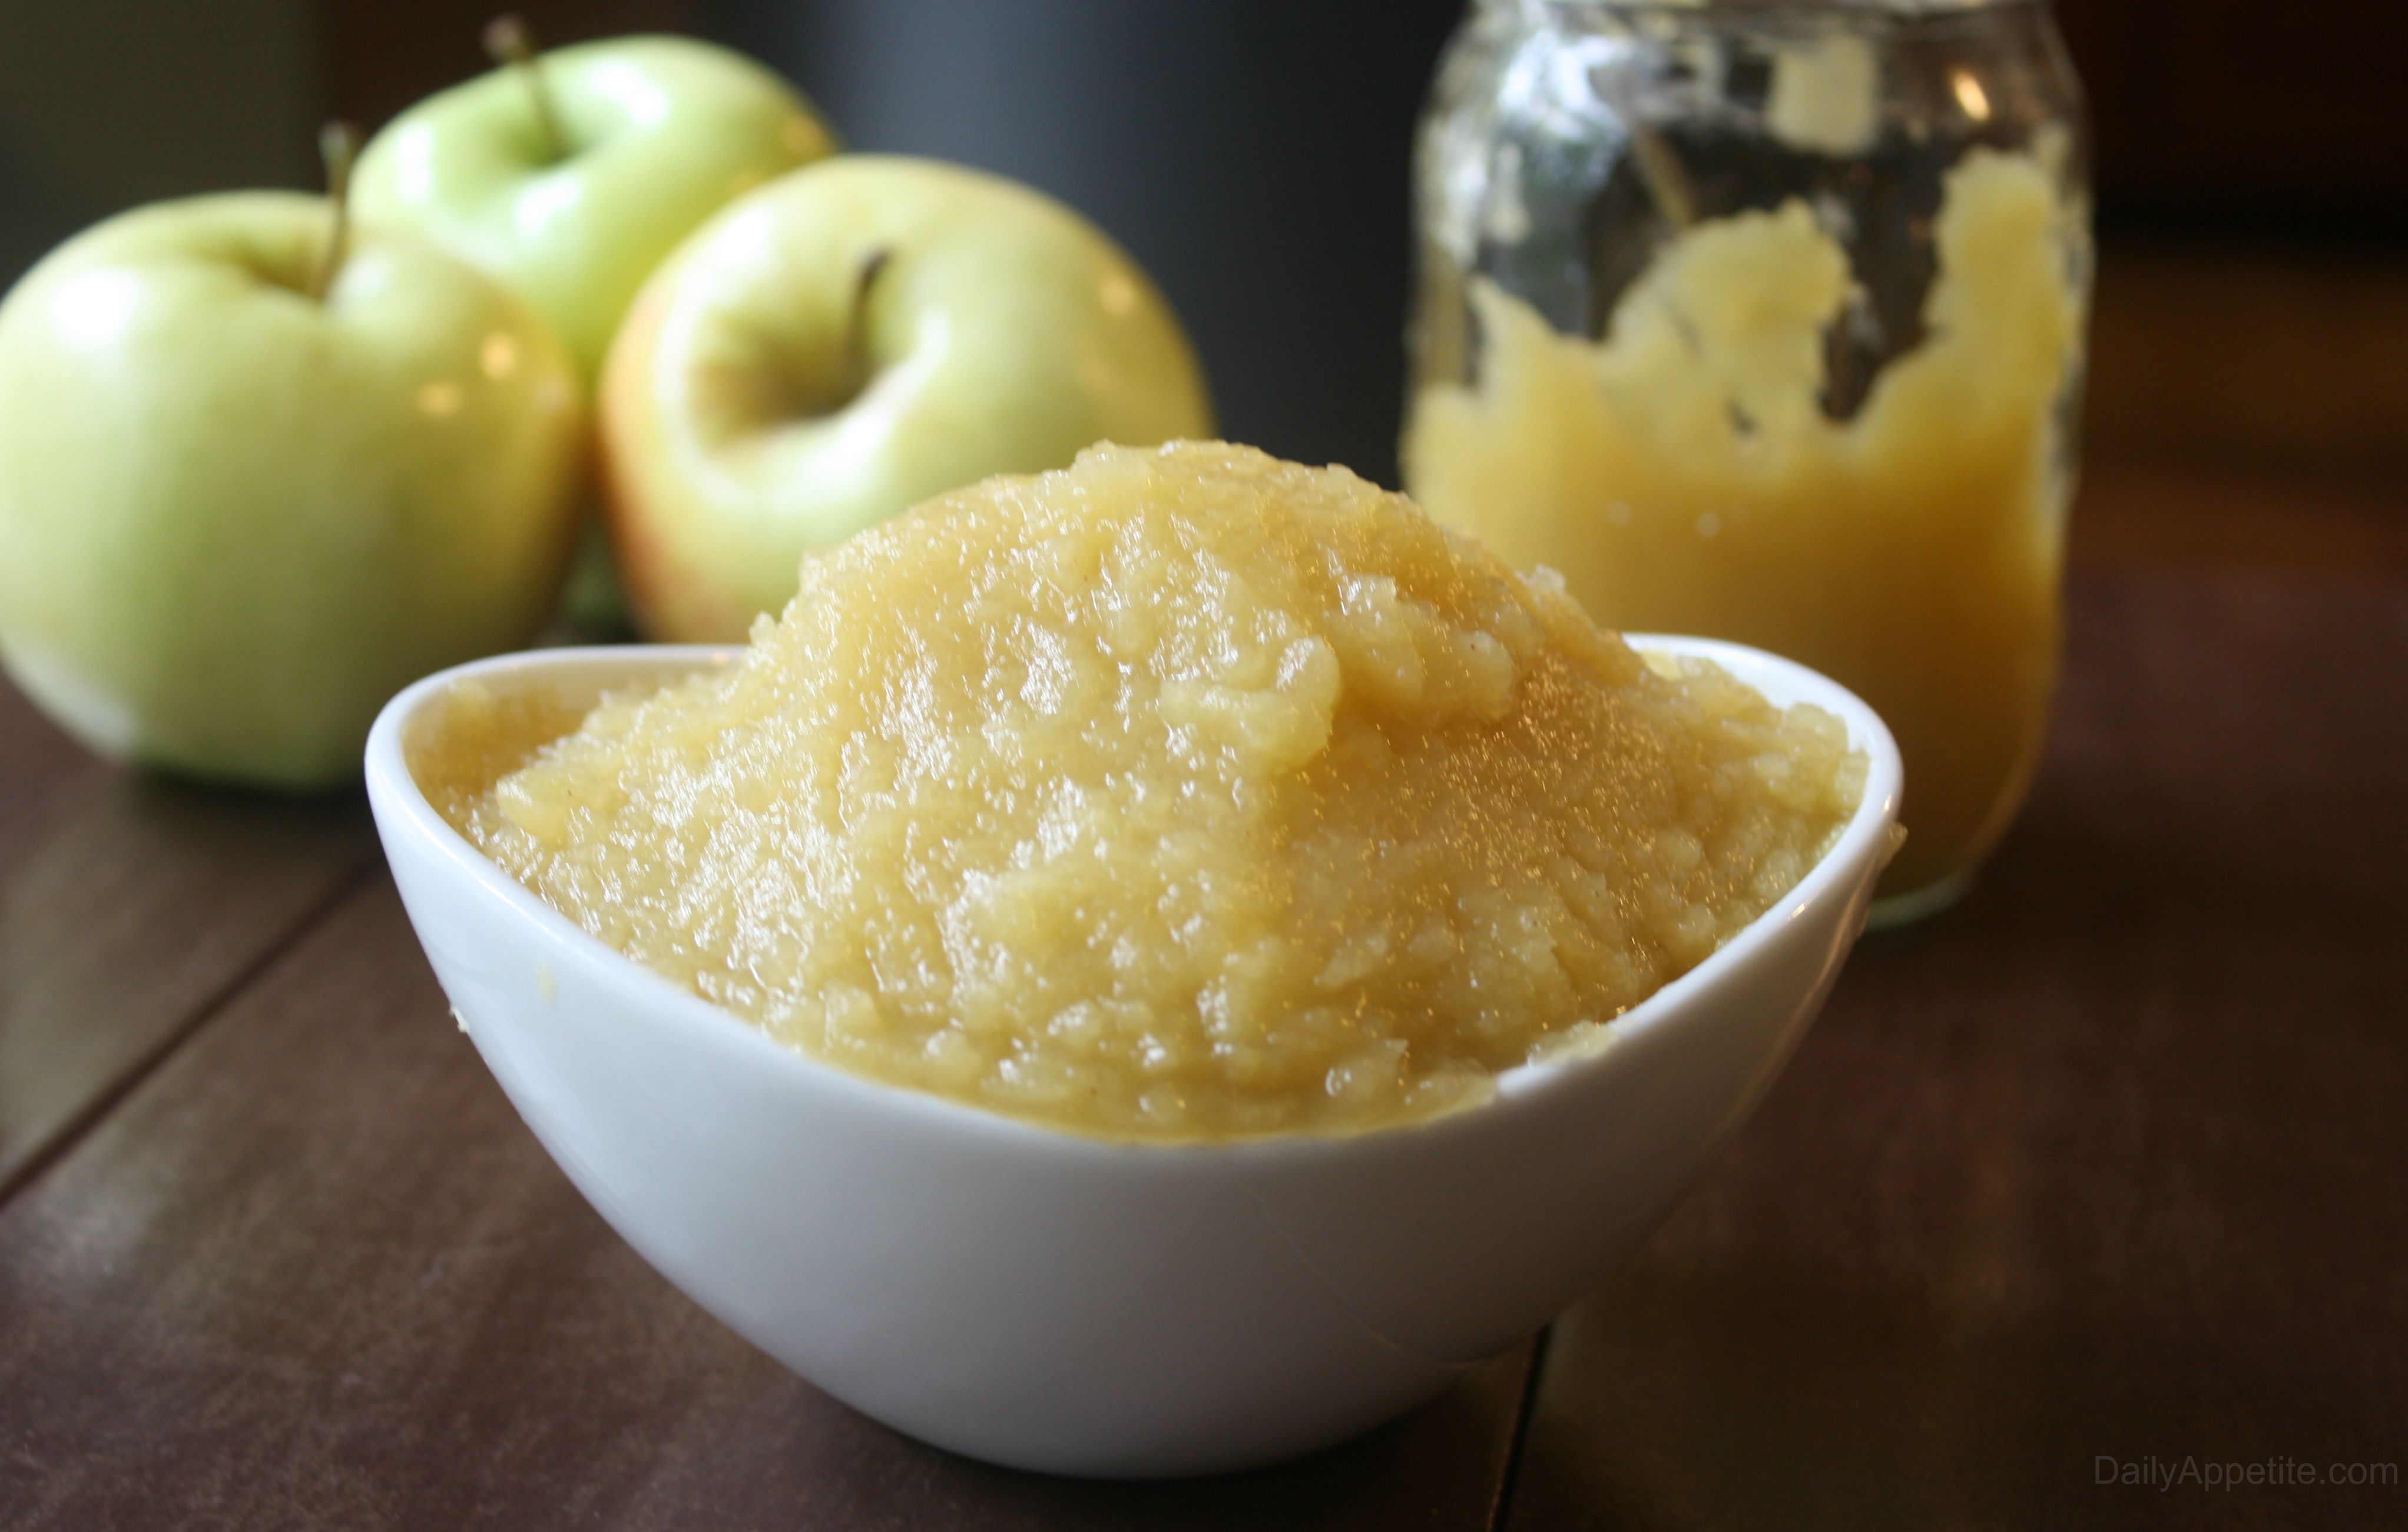 How to make Applesauce. A simple recipe on how to make applesauce. Control the amount of sugar in your applesauce by making your own applesauce and adjusting the measurements. 